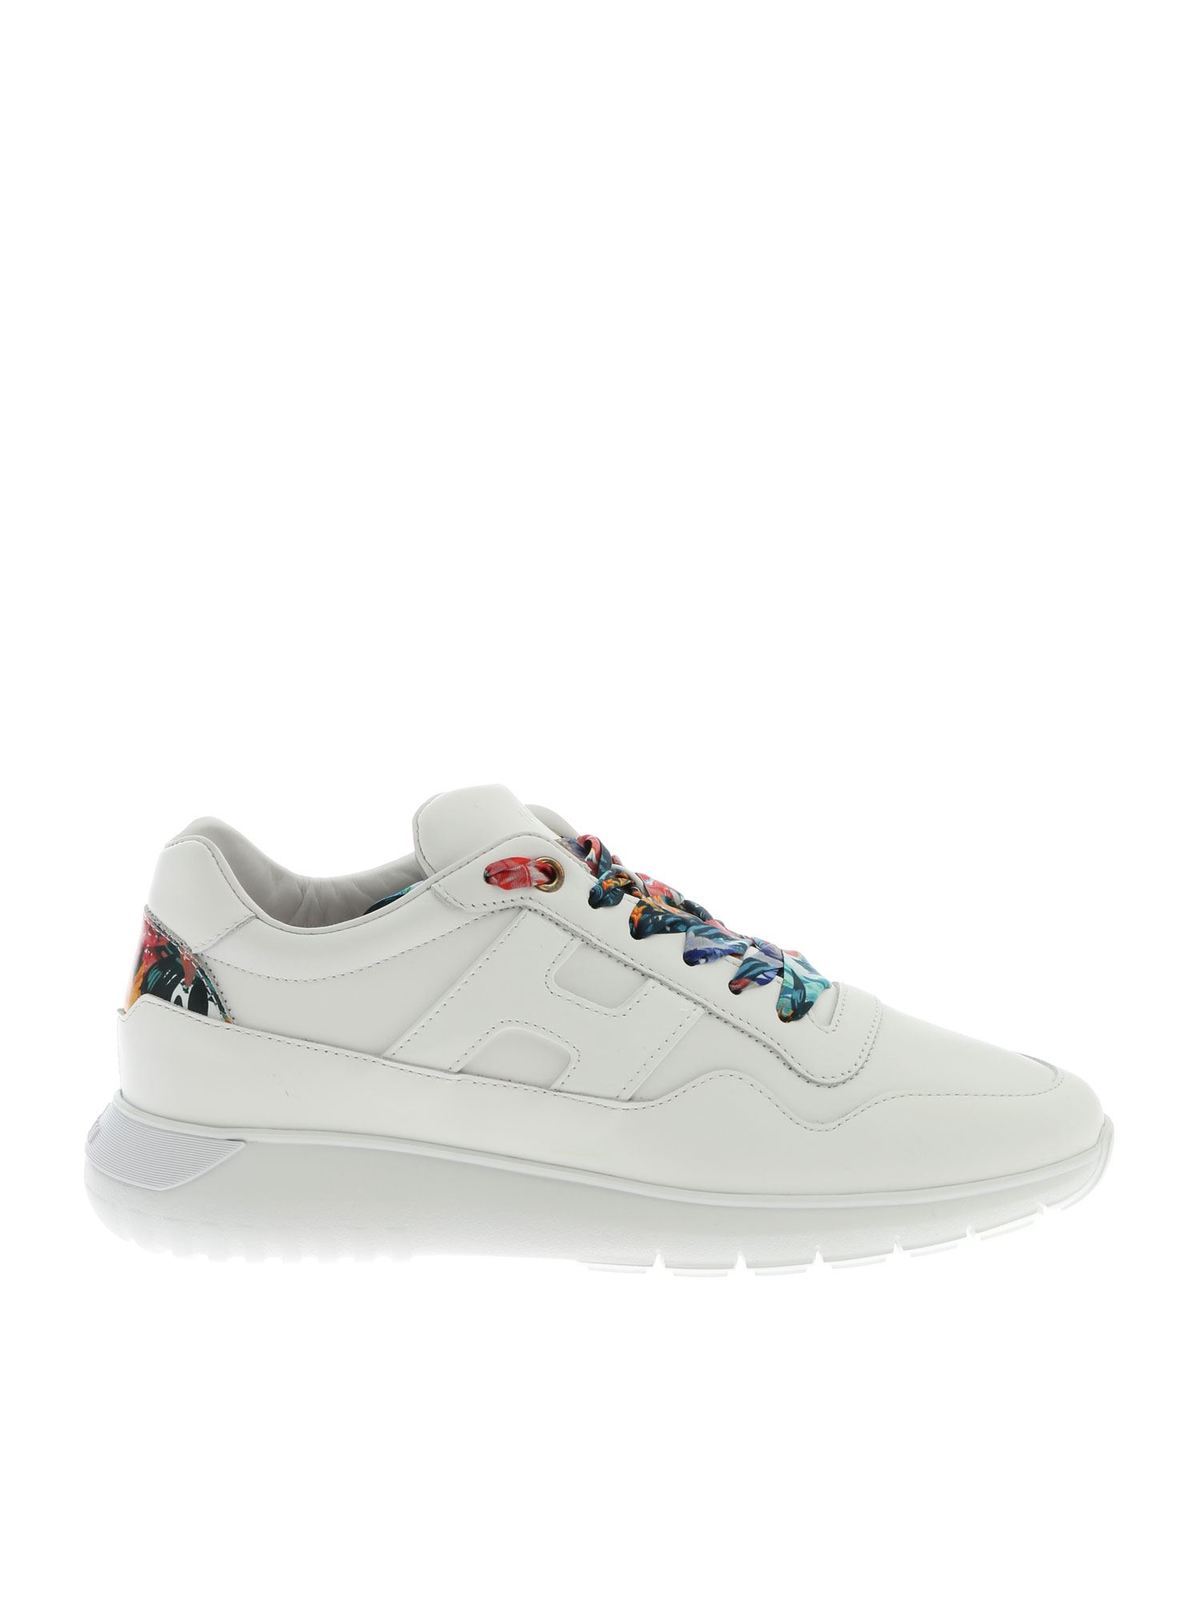 HOGAN H371 SNEAKERS WITH FLORAL DETAILS